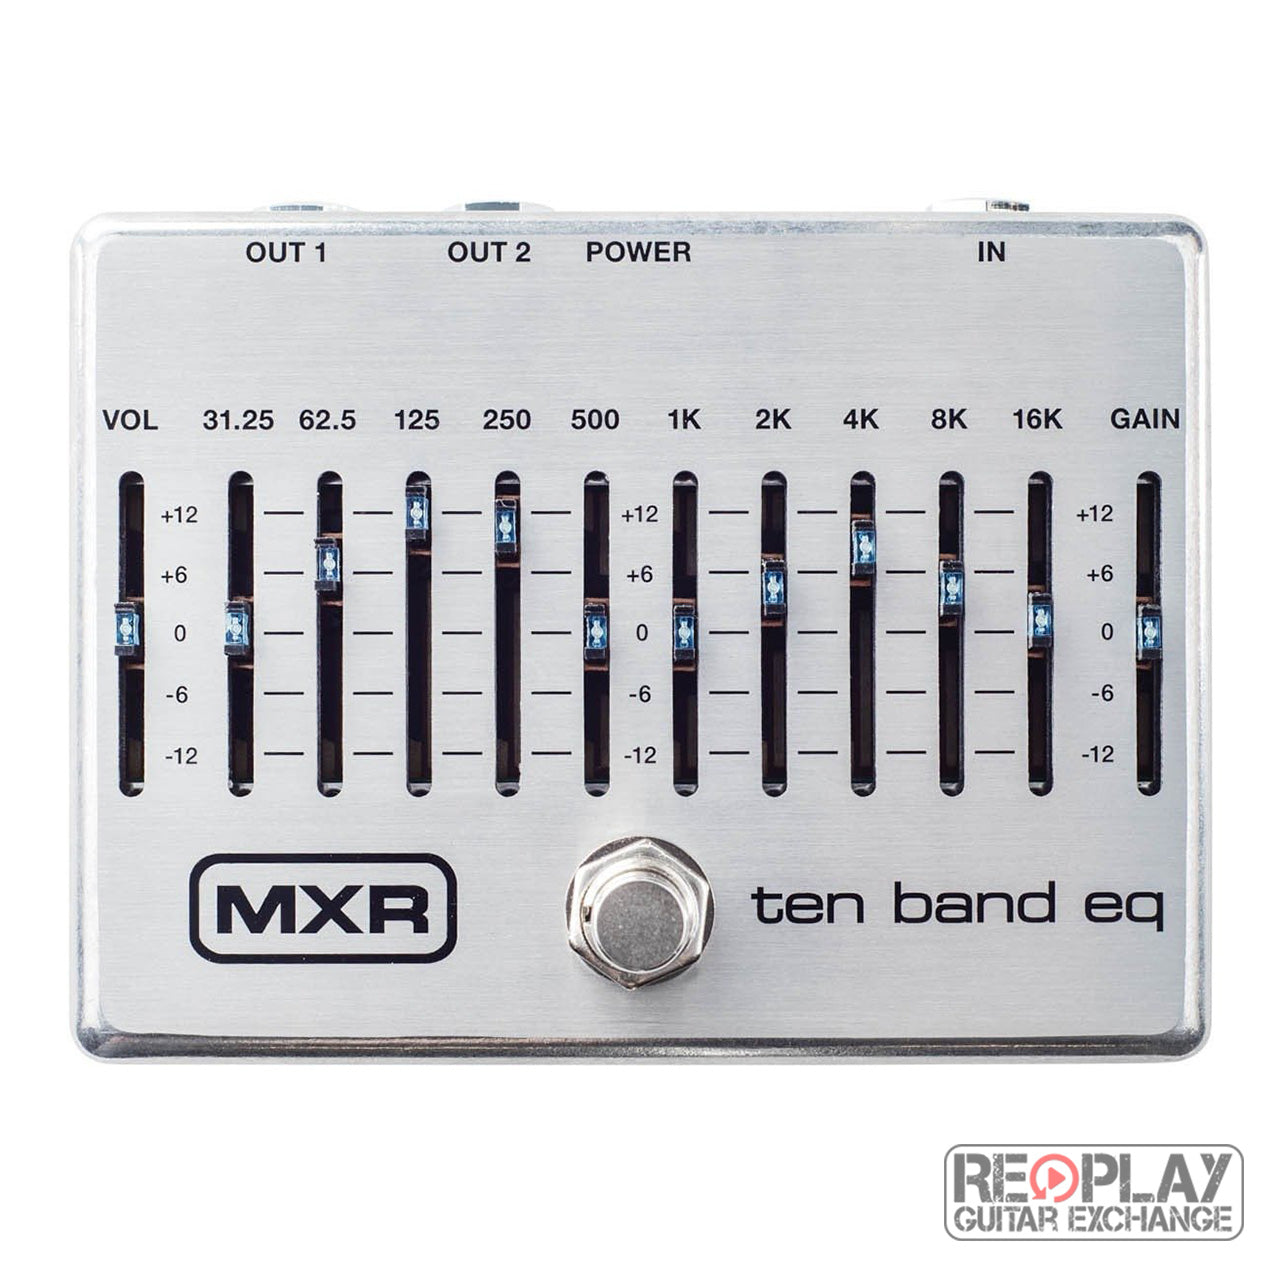 MXR M108S 10 Band Graphic EQ | For Sale | Replay Guitar Exchange